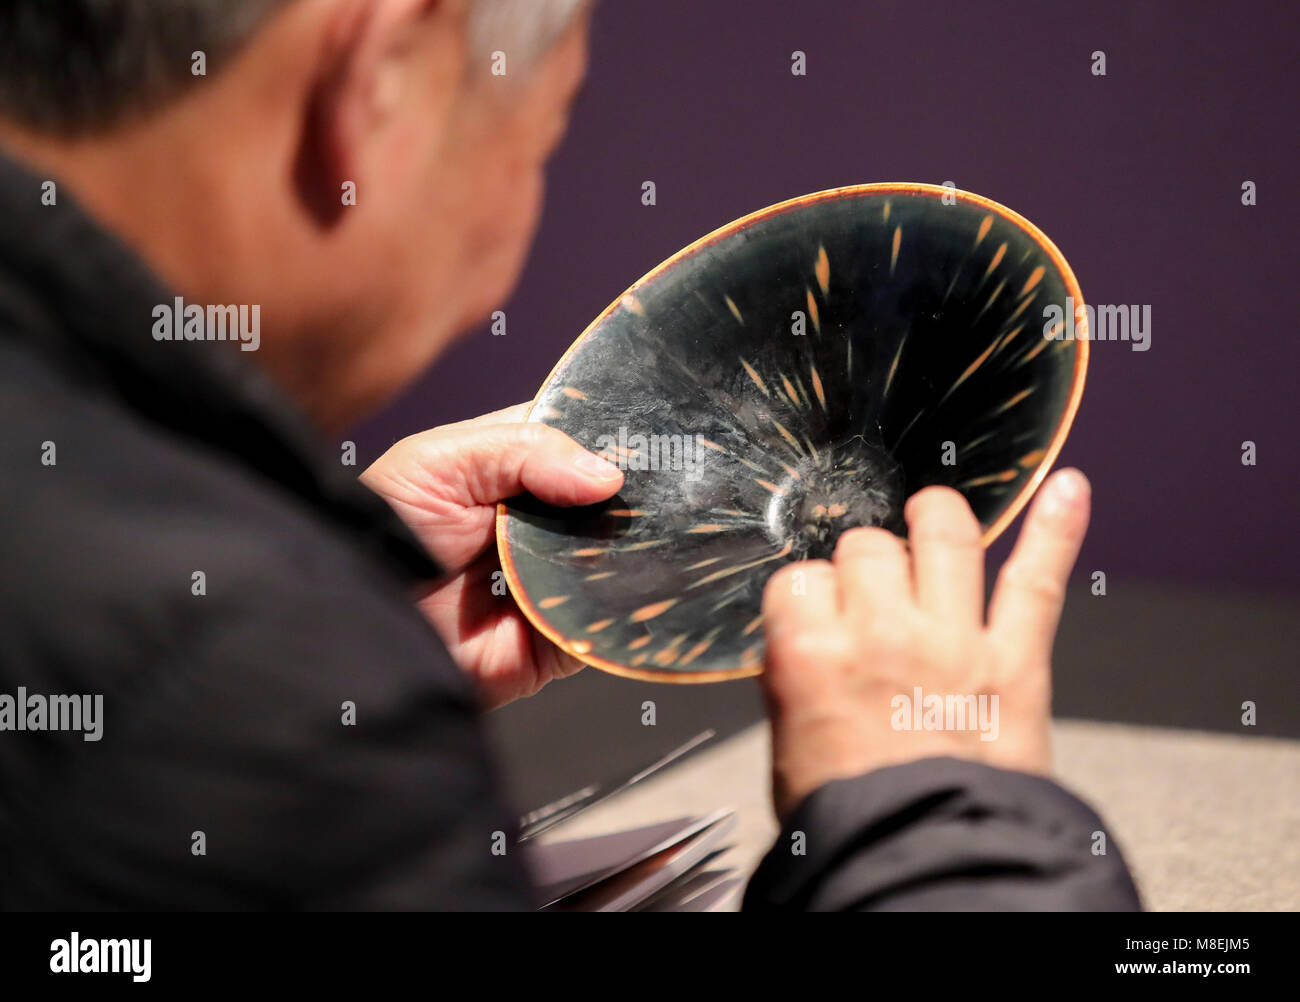 New York, USA. 16th Mar, 2018. A visitor looks at a Ding russet-splashed black-glazed conical bowl during the public viewing of Christie's Asian Art Week in New York, the United States, on March 16, 2018. Christie's on Friday kicked off its Asian Art Week, a series of auctions, viewings, and events, from March 16 to March 23. This season presents six distinct auctions including Fine Chinese Ceramics and Works of Art, South Asian Modern   Contemporary Art, etc. Credit: Wang Ying/Xinhua/Alamy Live News Stock Photo